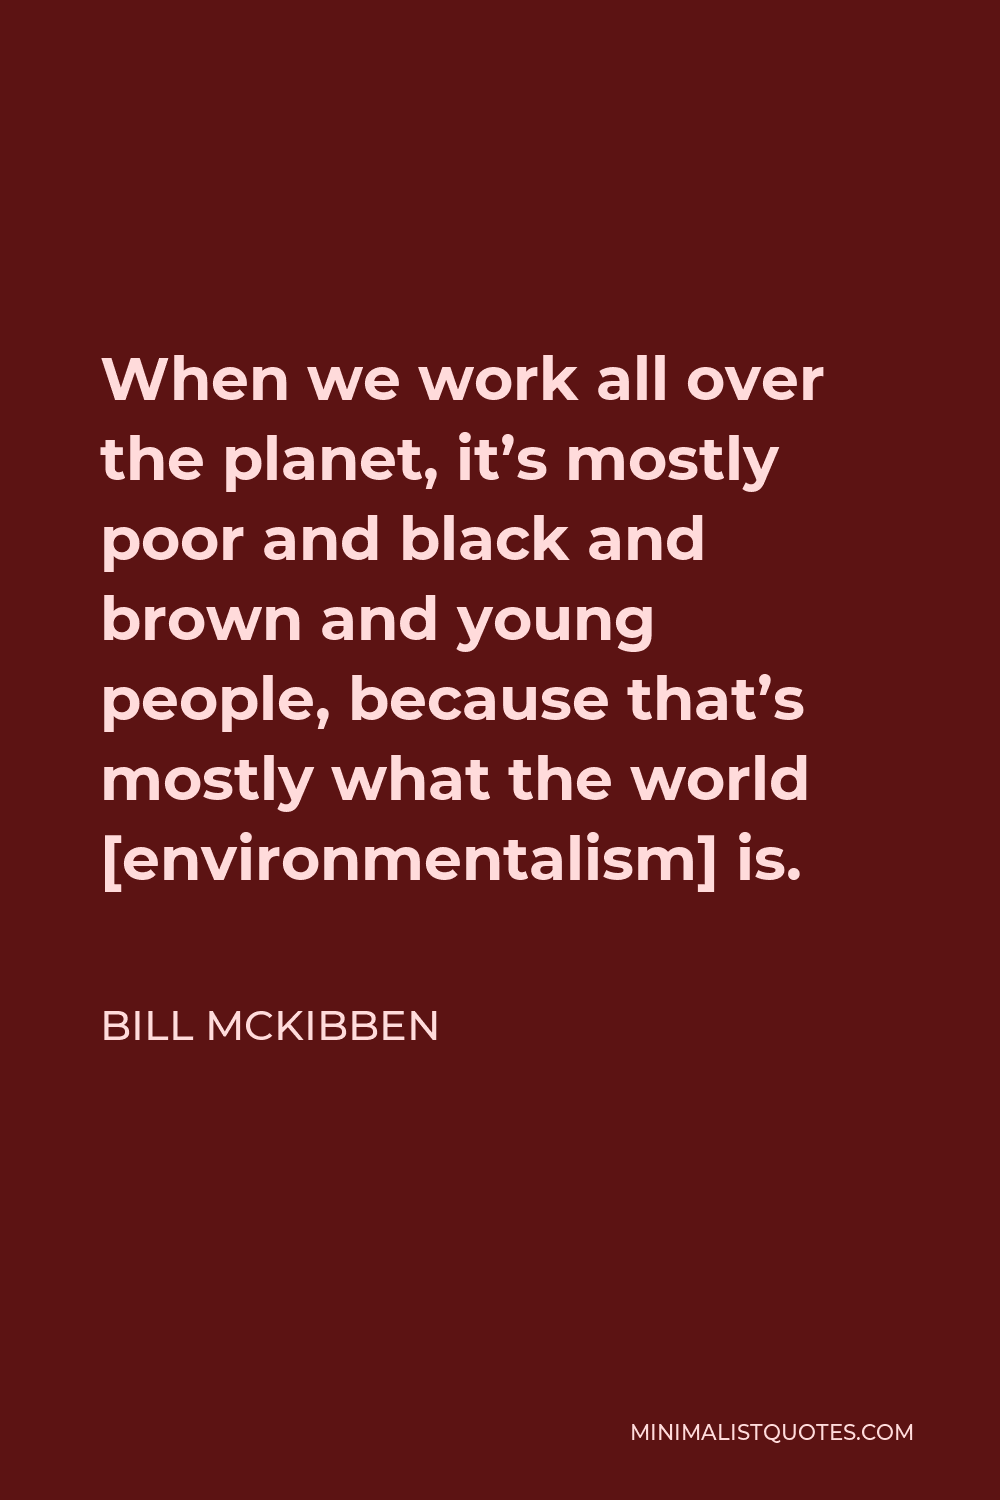 Bill McKibben Quote - When we work all over the planet, it’s mostly poor and black and brown and young people, because that’s mostly what the world [environmentalism] is.